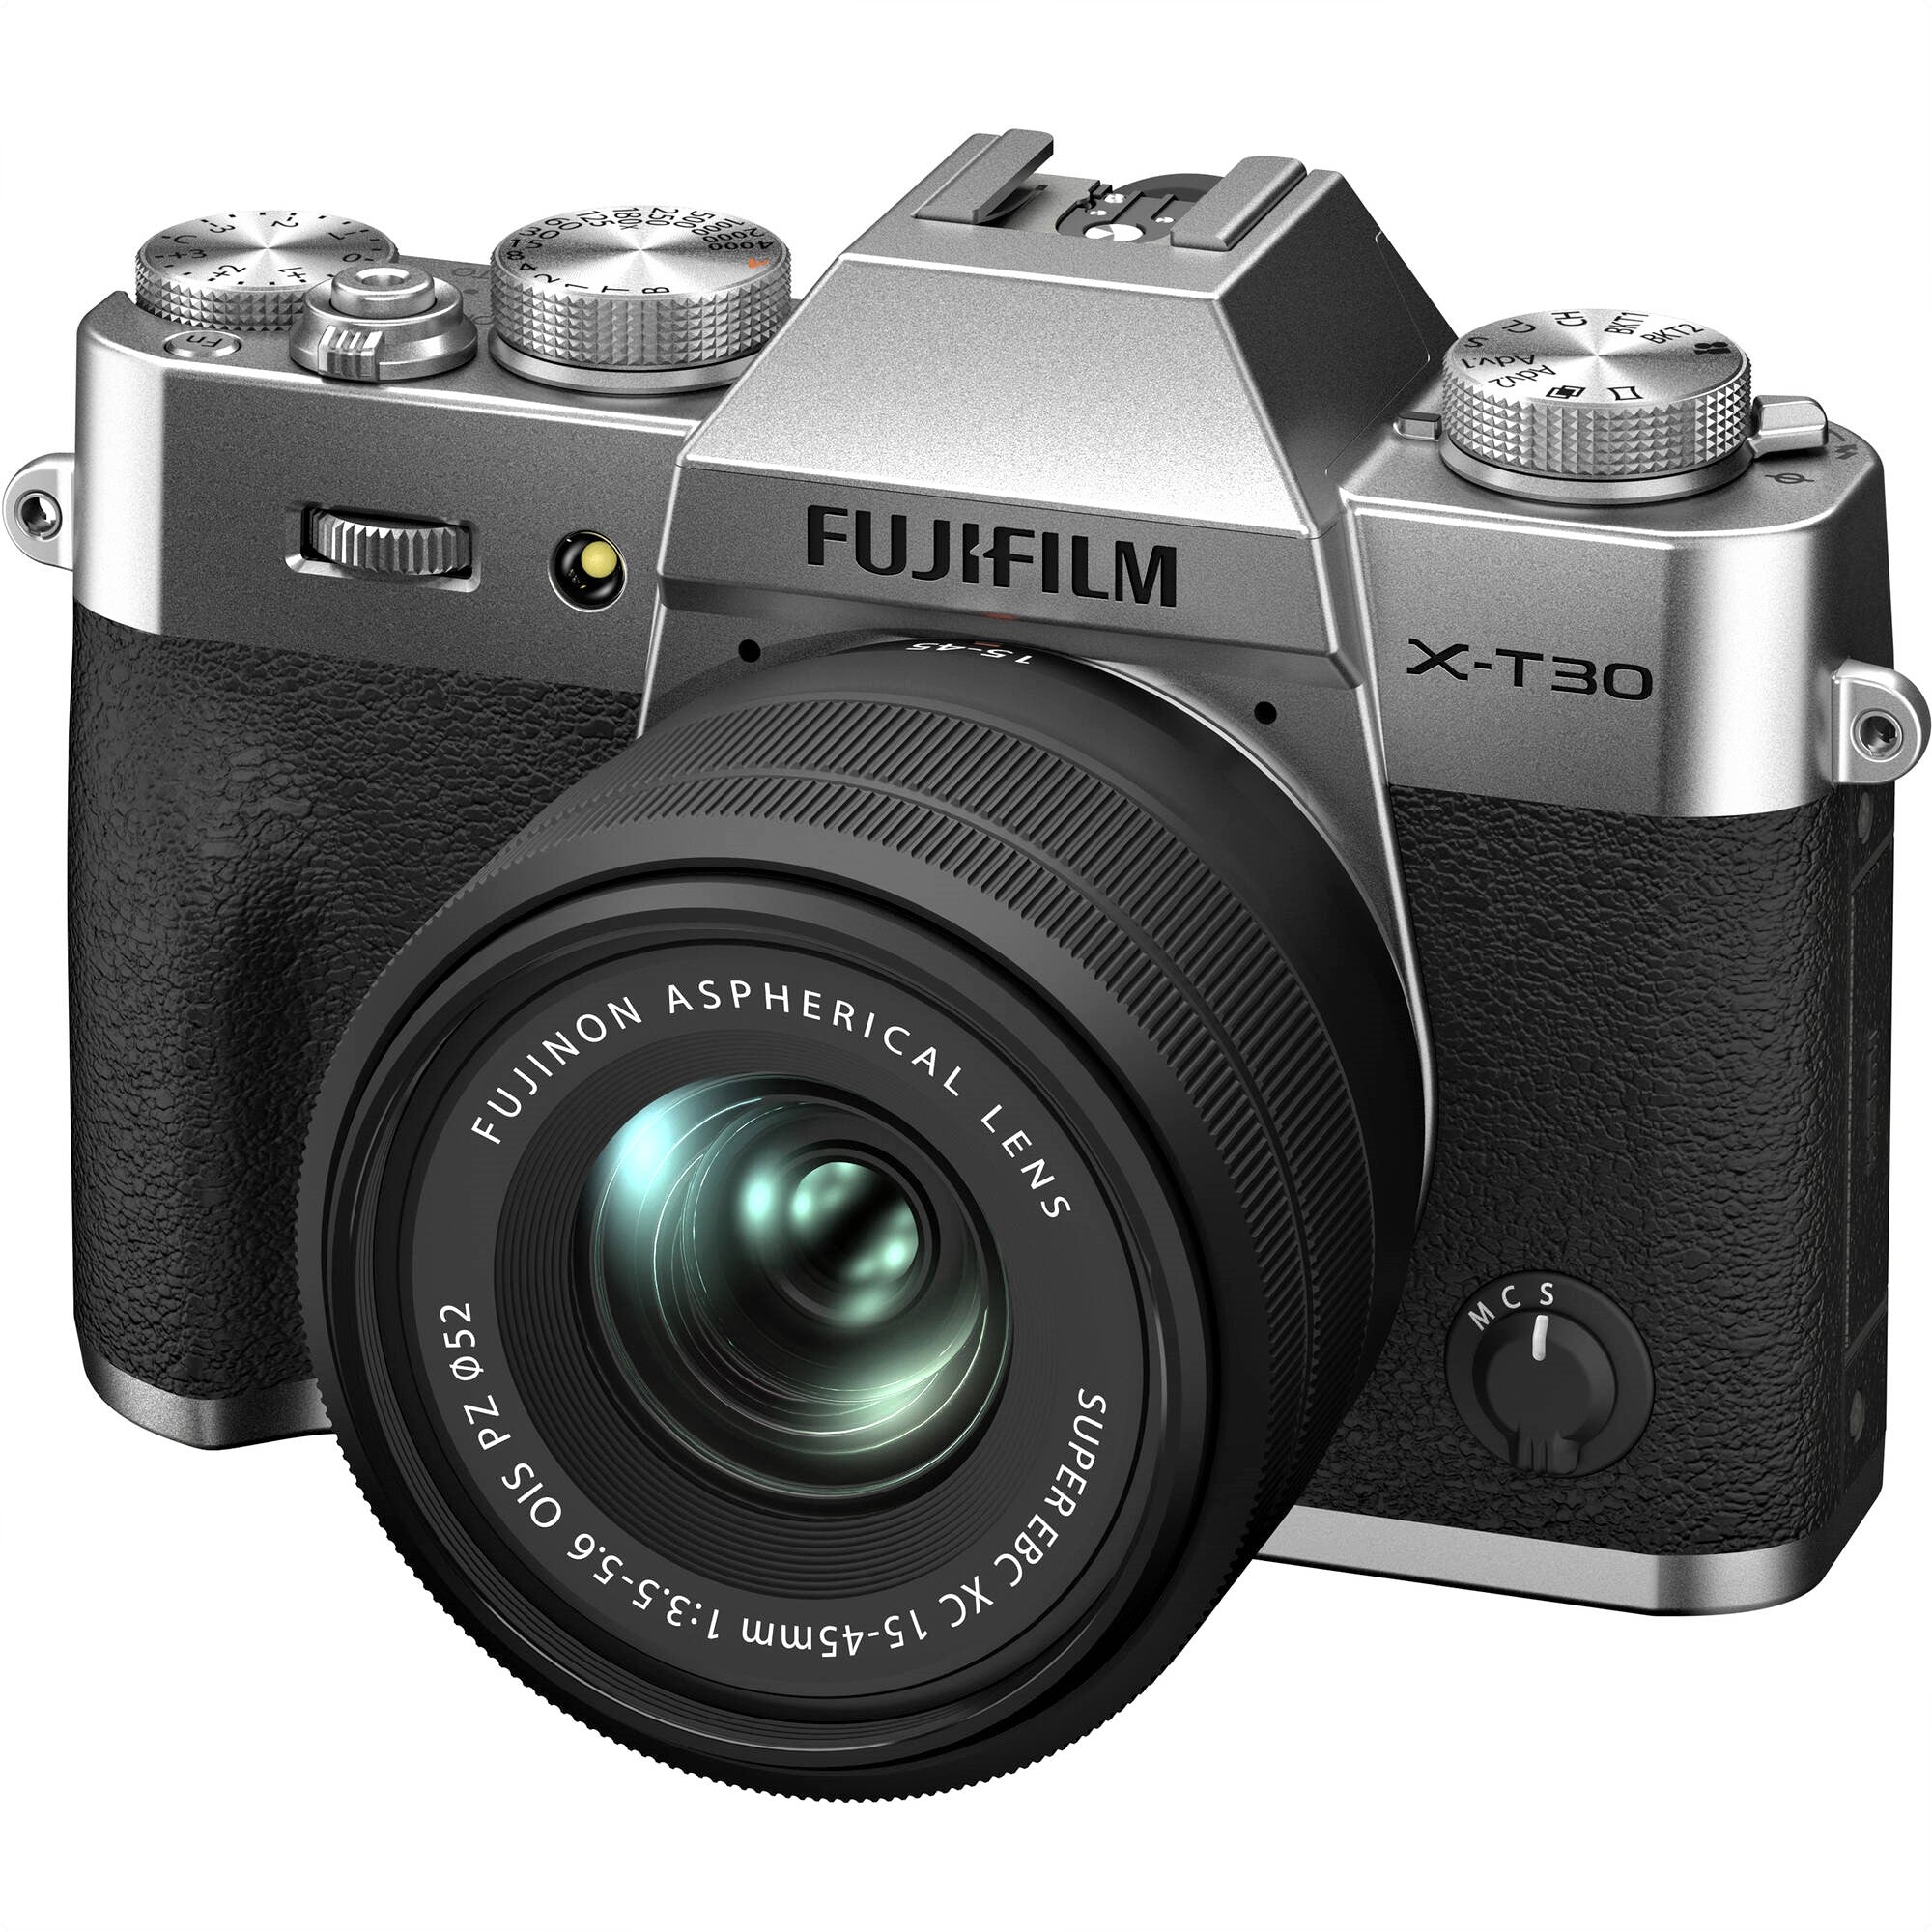 Fujifilm X-T30 II Mirrorless Camera with XC 15-45mm OIS PZ Lens (Silver) - Distant view